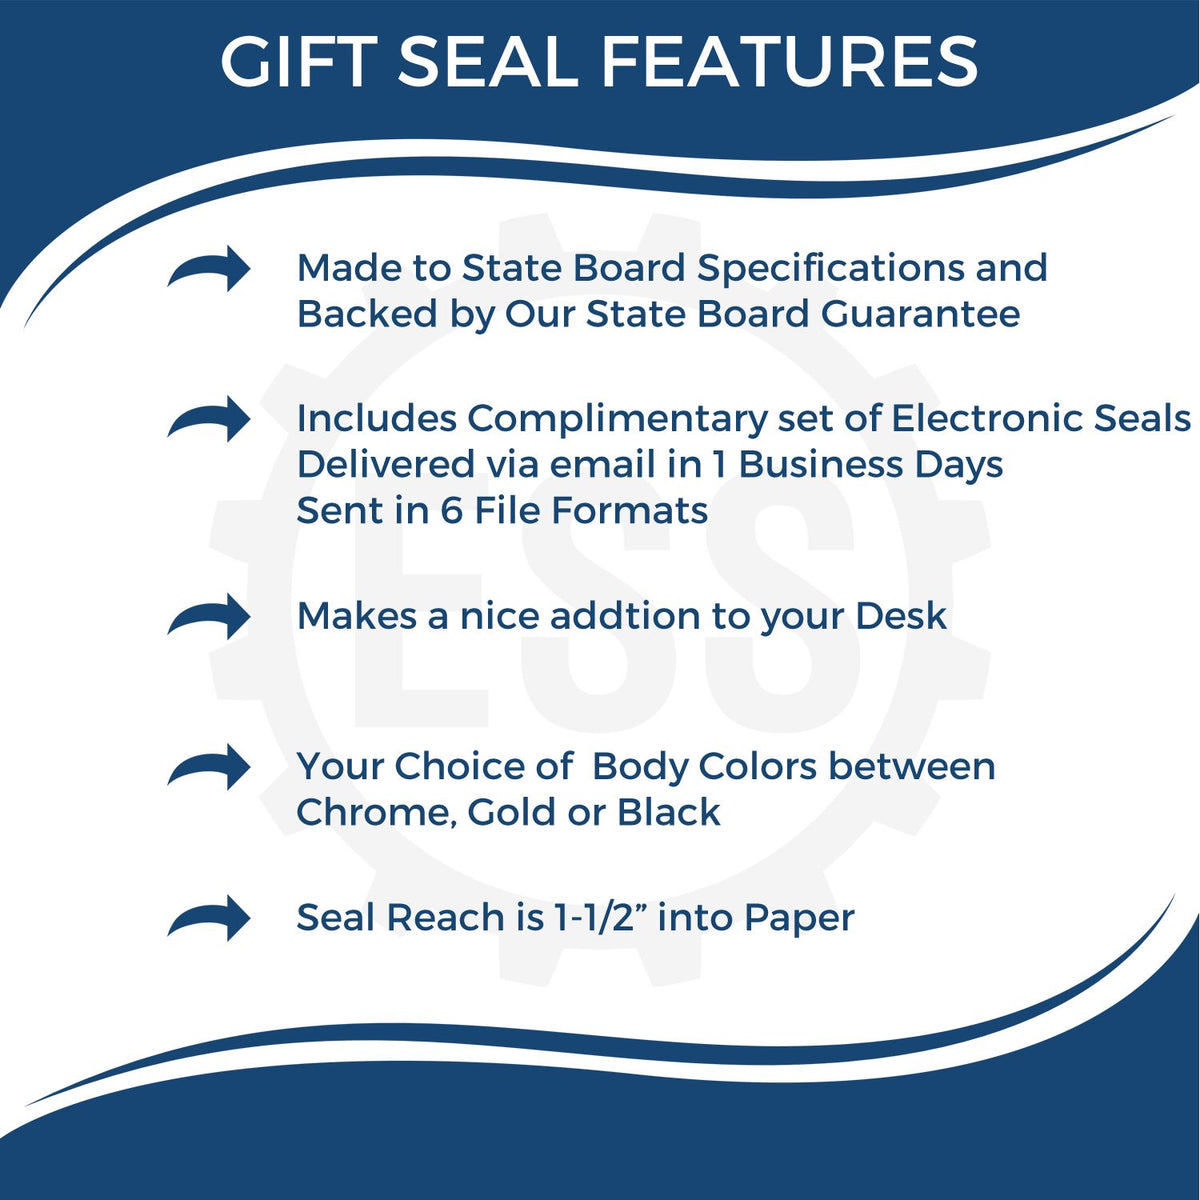 A picture of an infographic highlighting the selling points for the Gift Michigan Architect Seal